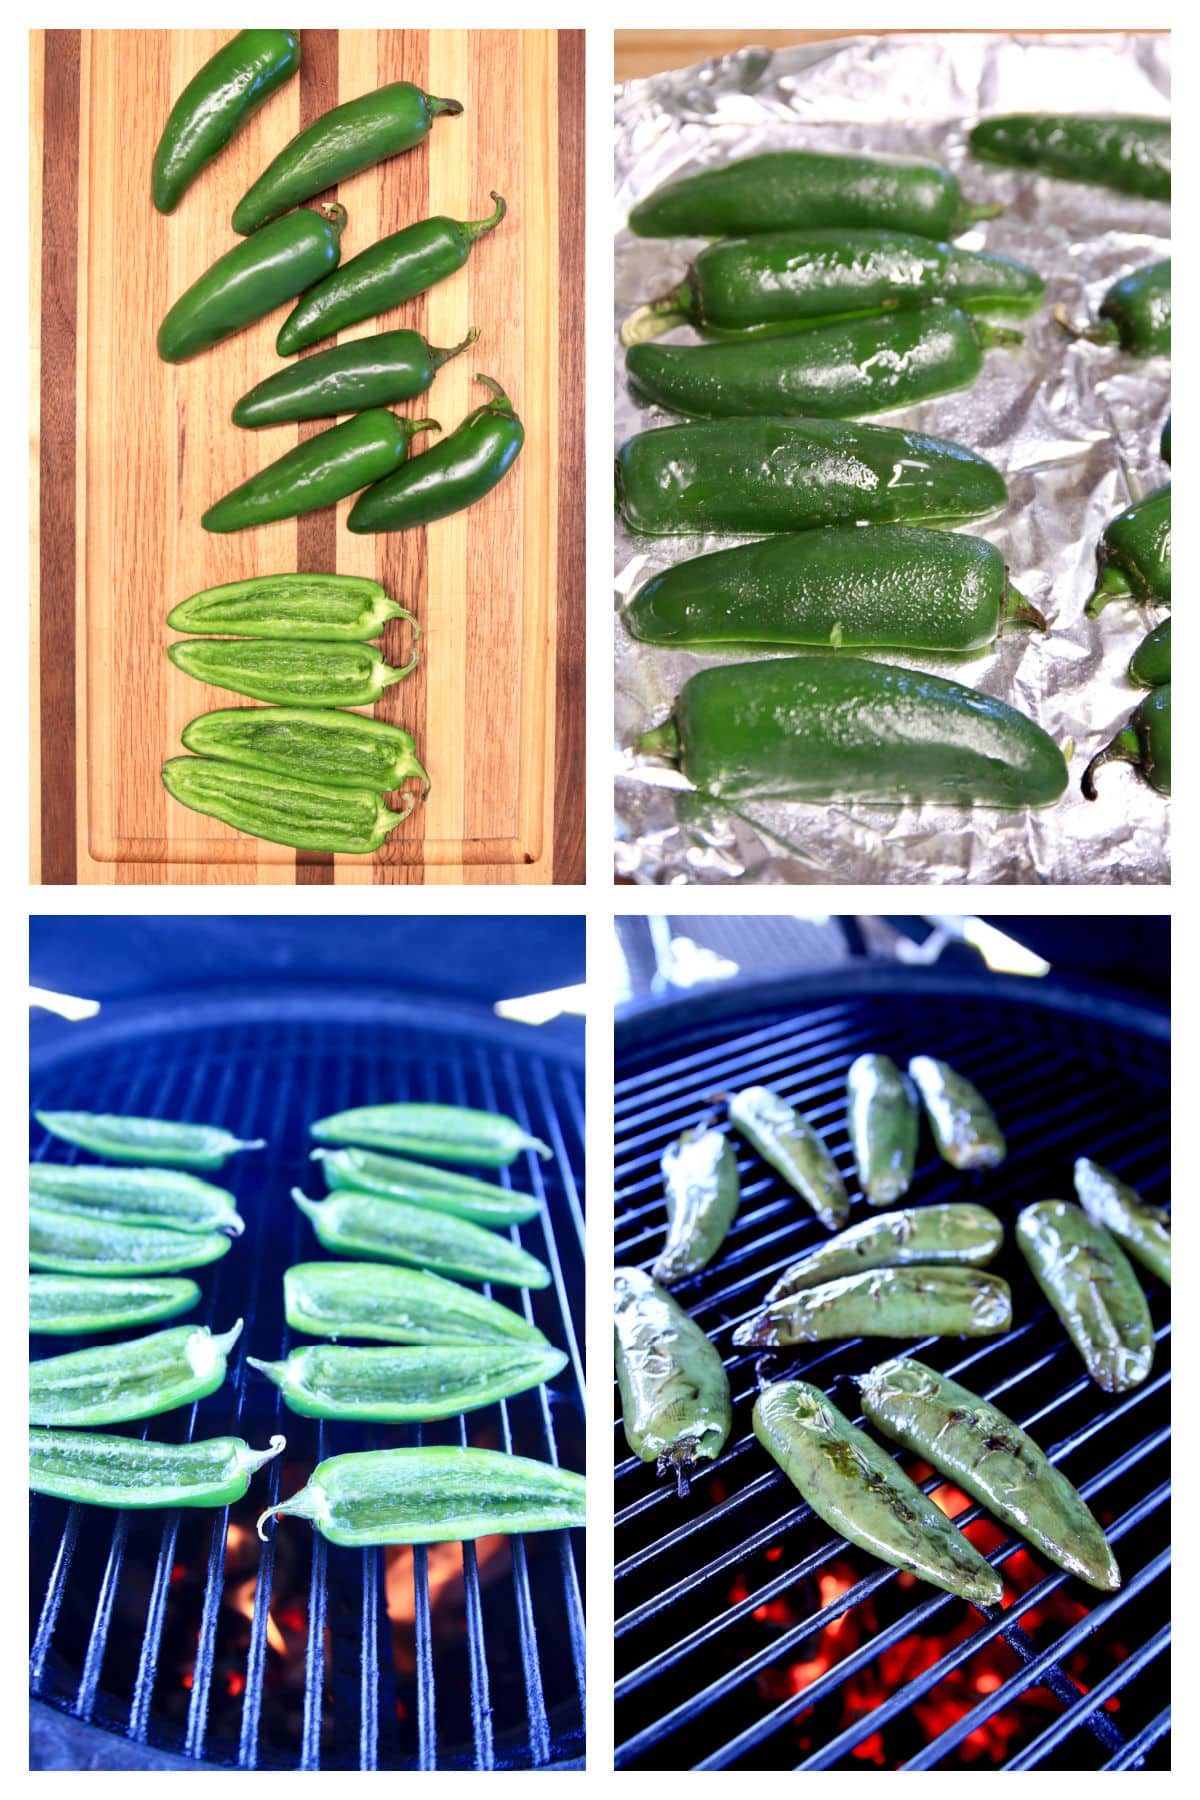 Collage making fire roasted jalapenos, cut in half, lenghtwise.